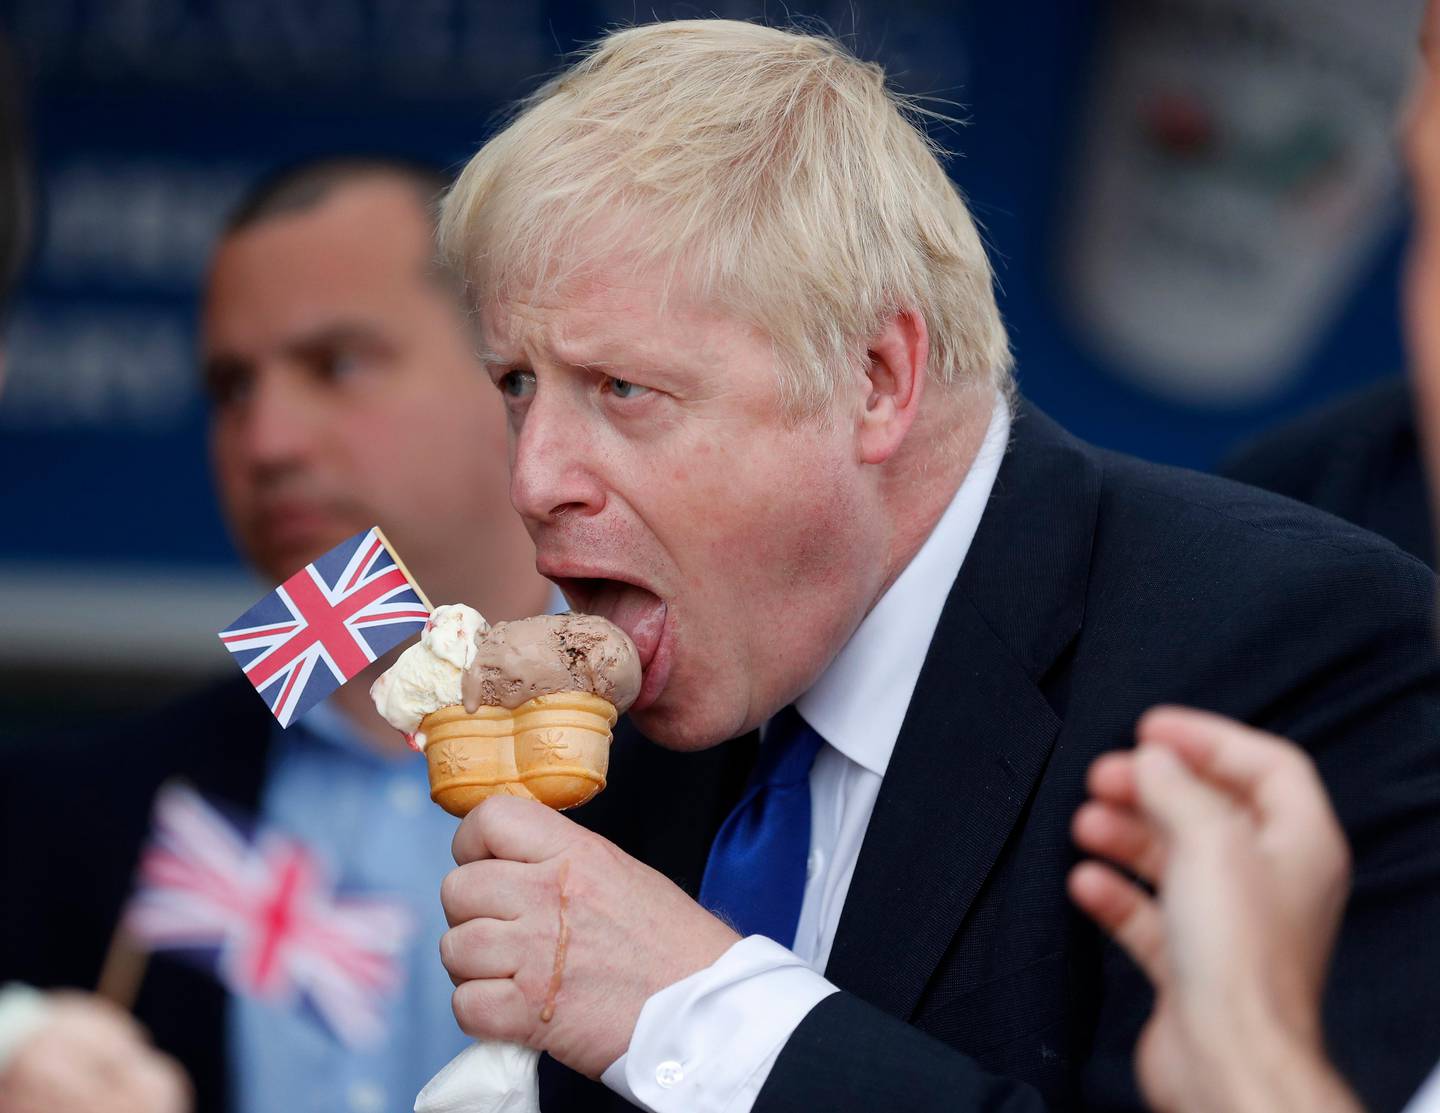 Conservative Party leadership candidate Boris Johnson eats an ice cream in Barry Island, Wales, Saturday, July 6, 2019 ahead of the Conservative party leadership hustings in Cardiff. The two contenders, Jeremy Hunt and Boris Johnson are competing for votes from party members, with the winner replacing Prime Minister Theresa May as party leader and Prime Minister of Britain's ruling Conservative Party. (AP Photo/Frank Augstein, Pool)